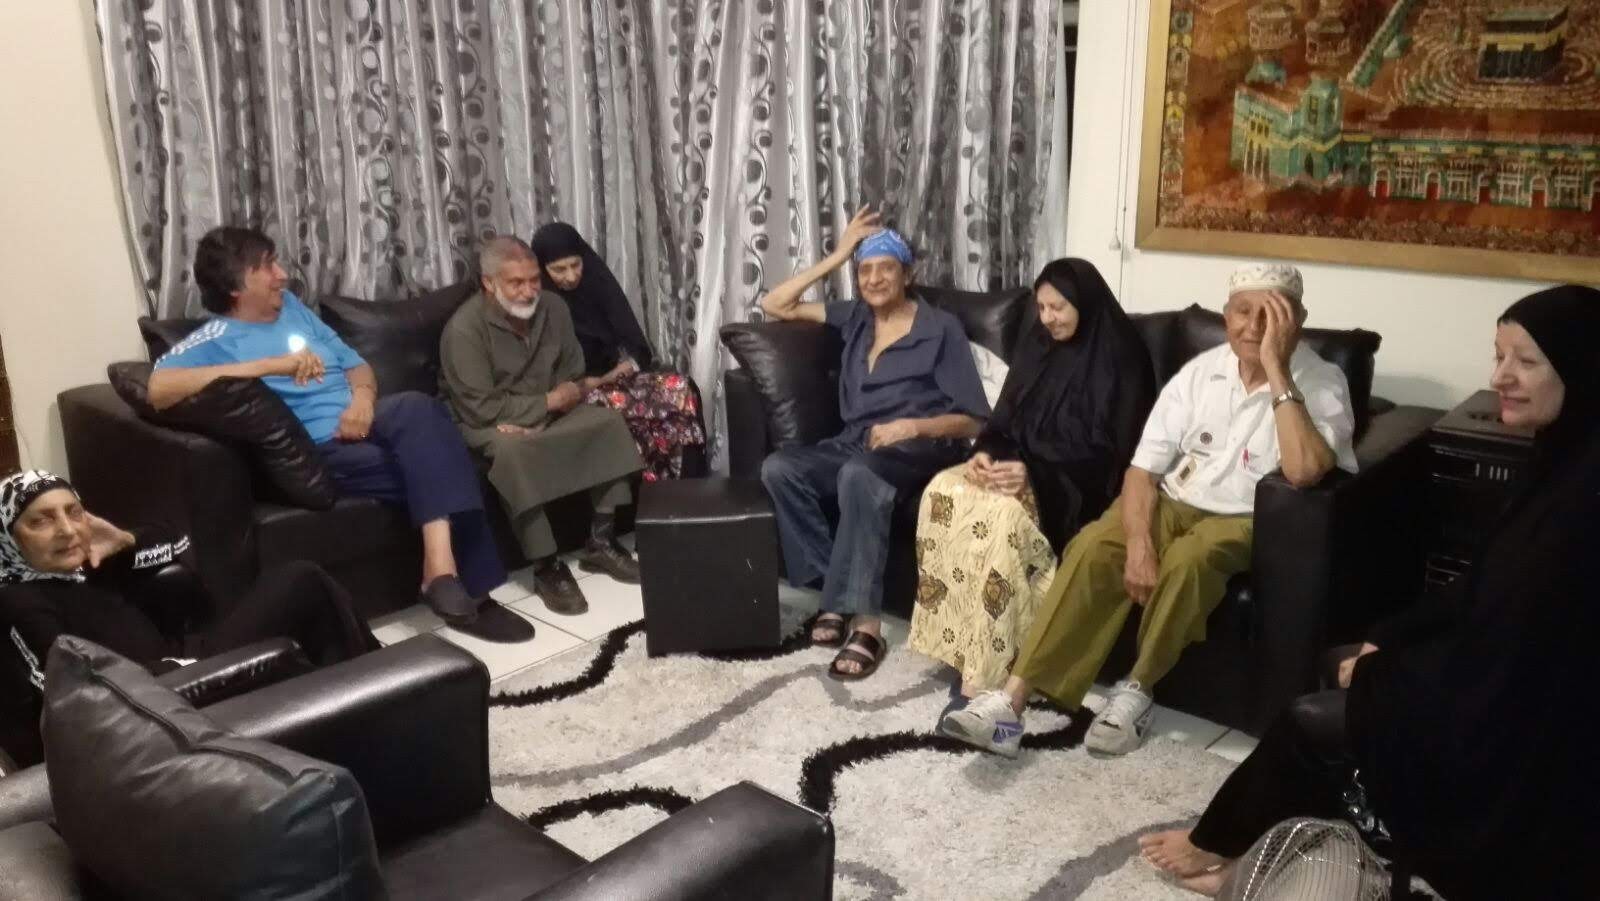 vacation Zohra, Ismail Sooliman's sis, presently ill, Sattar (daddy's bro, handed down), Mamdie, bro in law, handed down, his other half Hajra, dad's sis, presently ill, Ismail Sooliman, handed down, his sis Khadija and her other half Ebrahim, both handed down, and Imtiaz Sooliman's stepmother Farida at Ismail's home in Mohadin, Potchefstroom. Imtiaz keeps in mind that this is most likely the most considerable picture in this piece. Image: Supplied by Imtiaz Sooliman